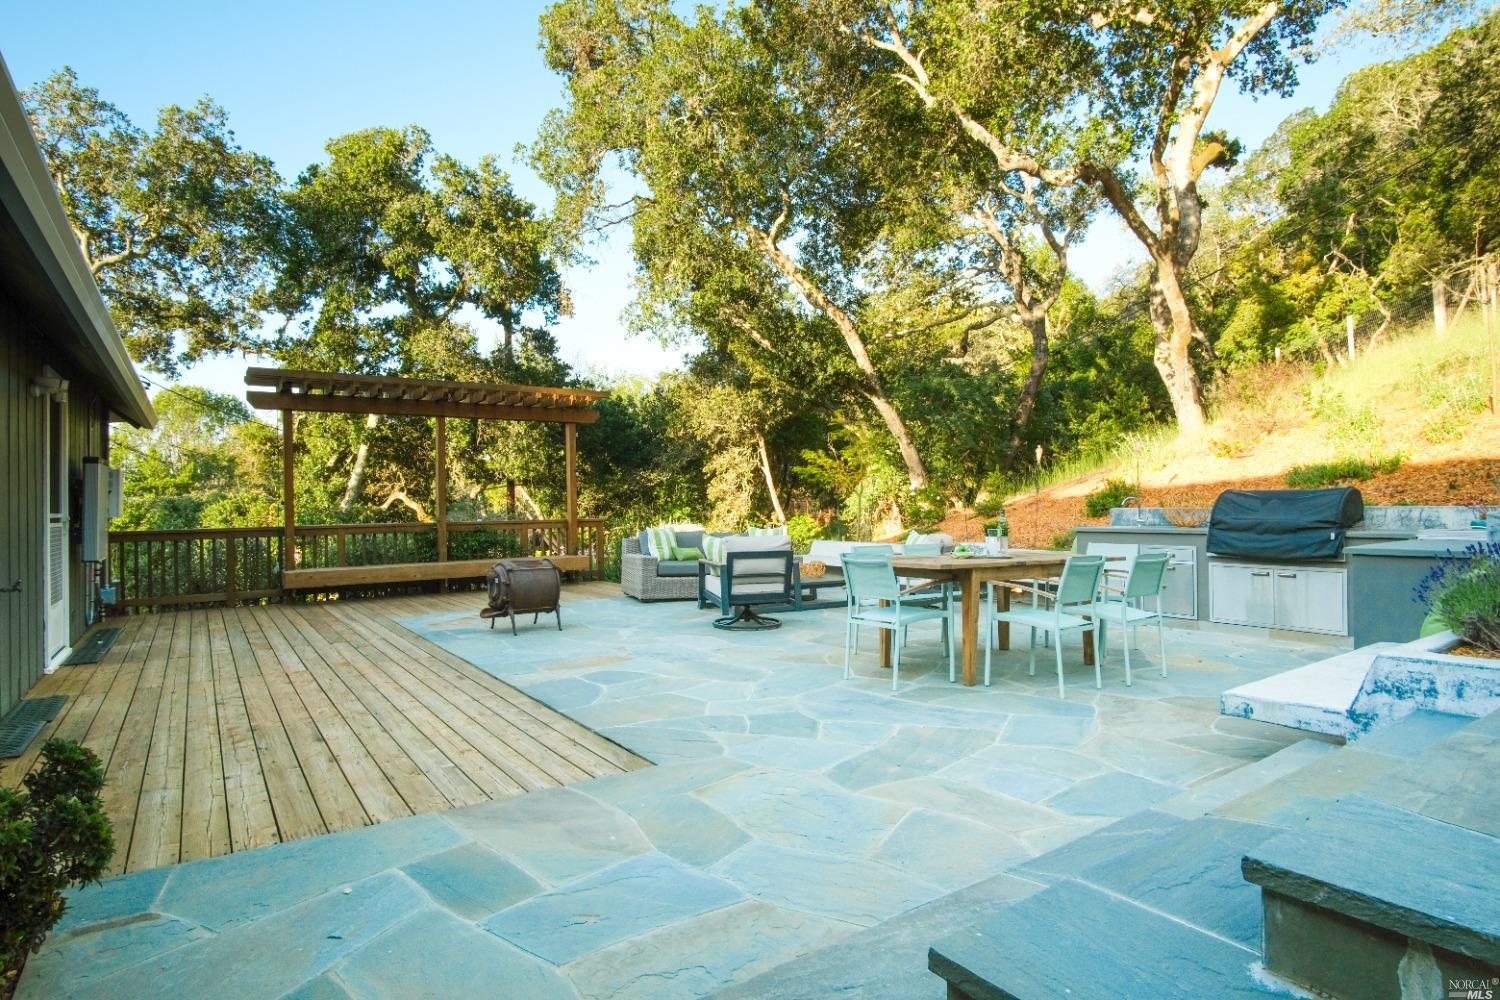 an outdoor space with patio and sitting space